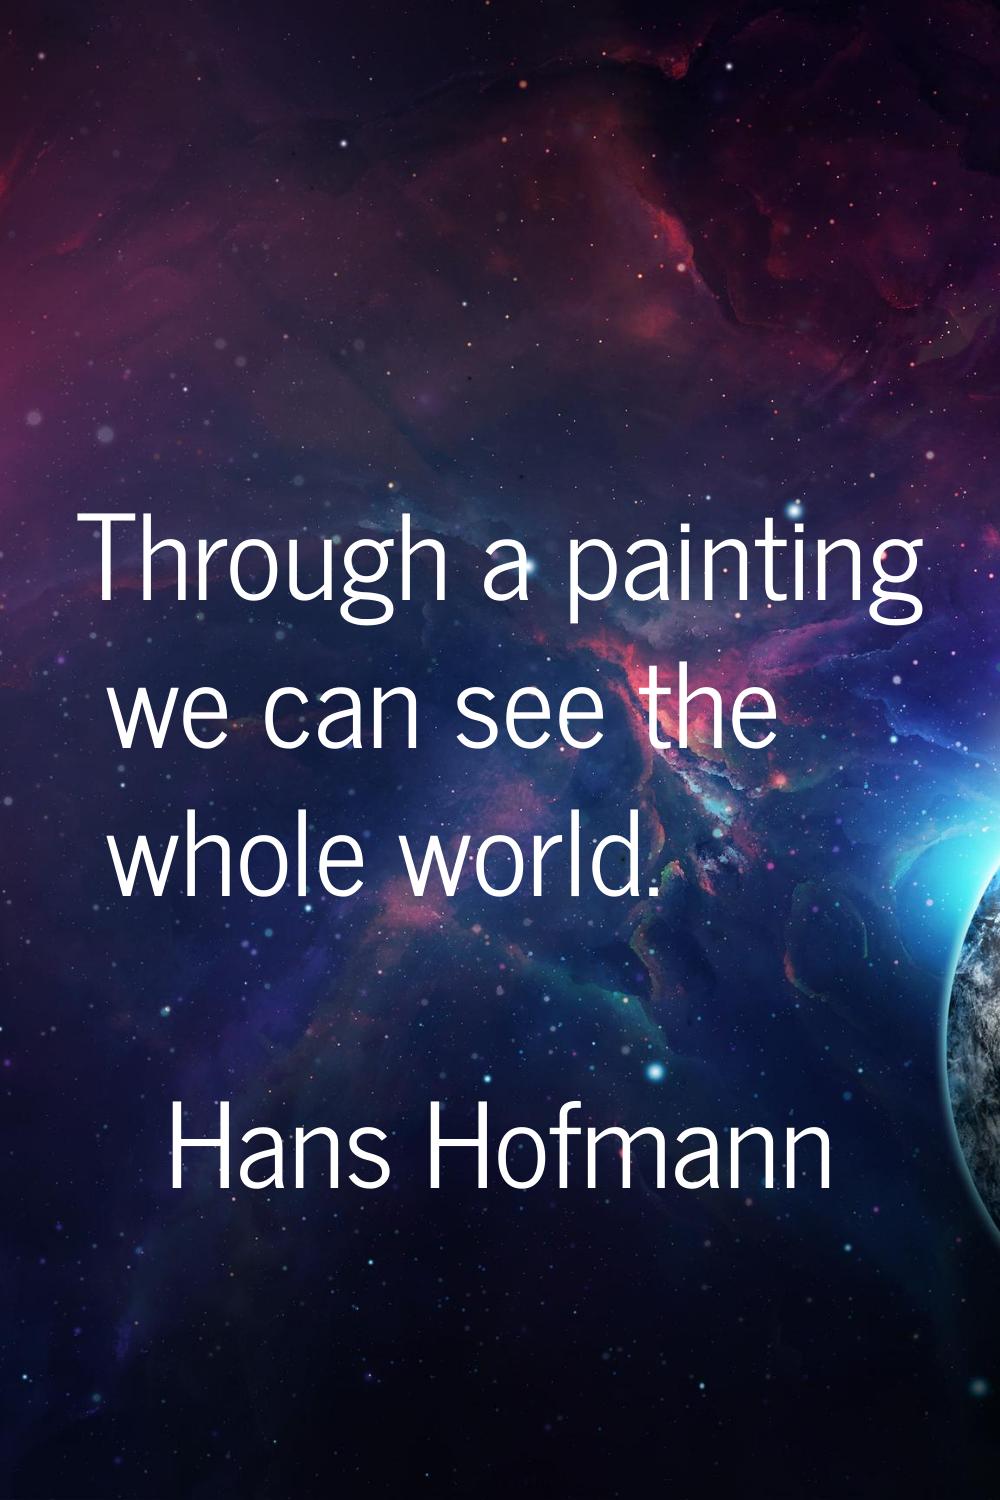 Through a painting we can see the whole world.